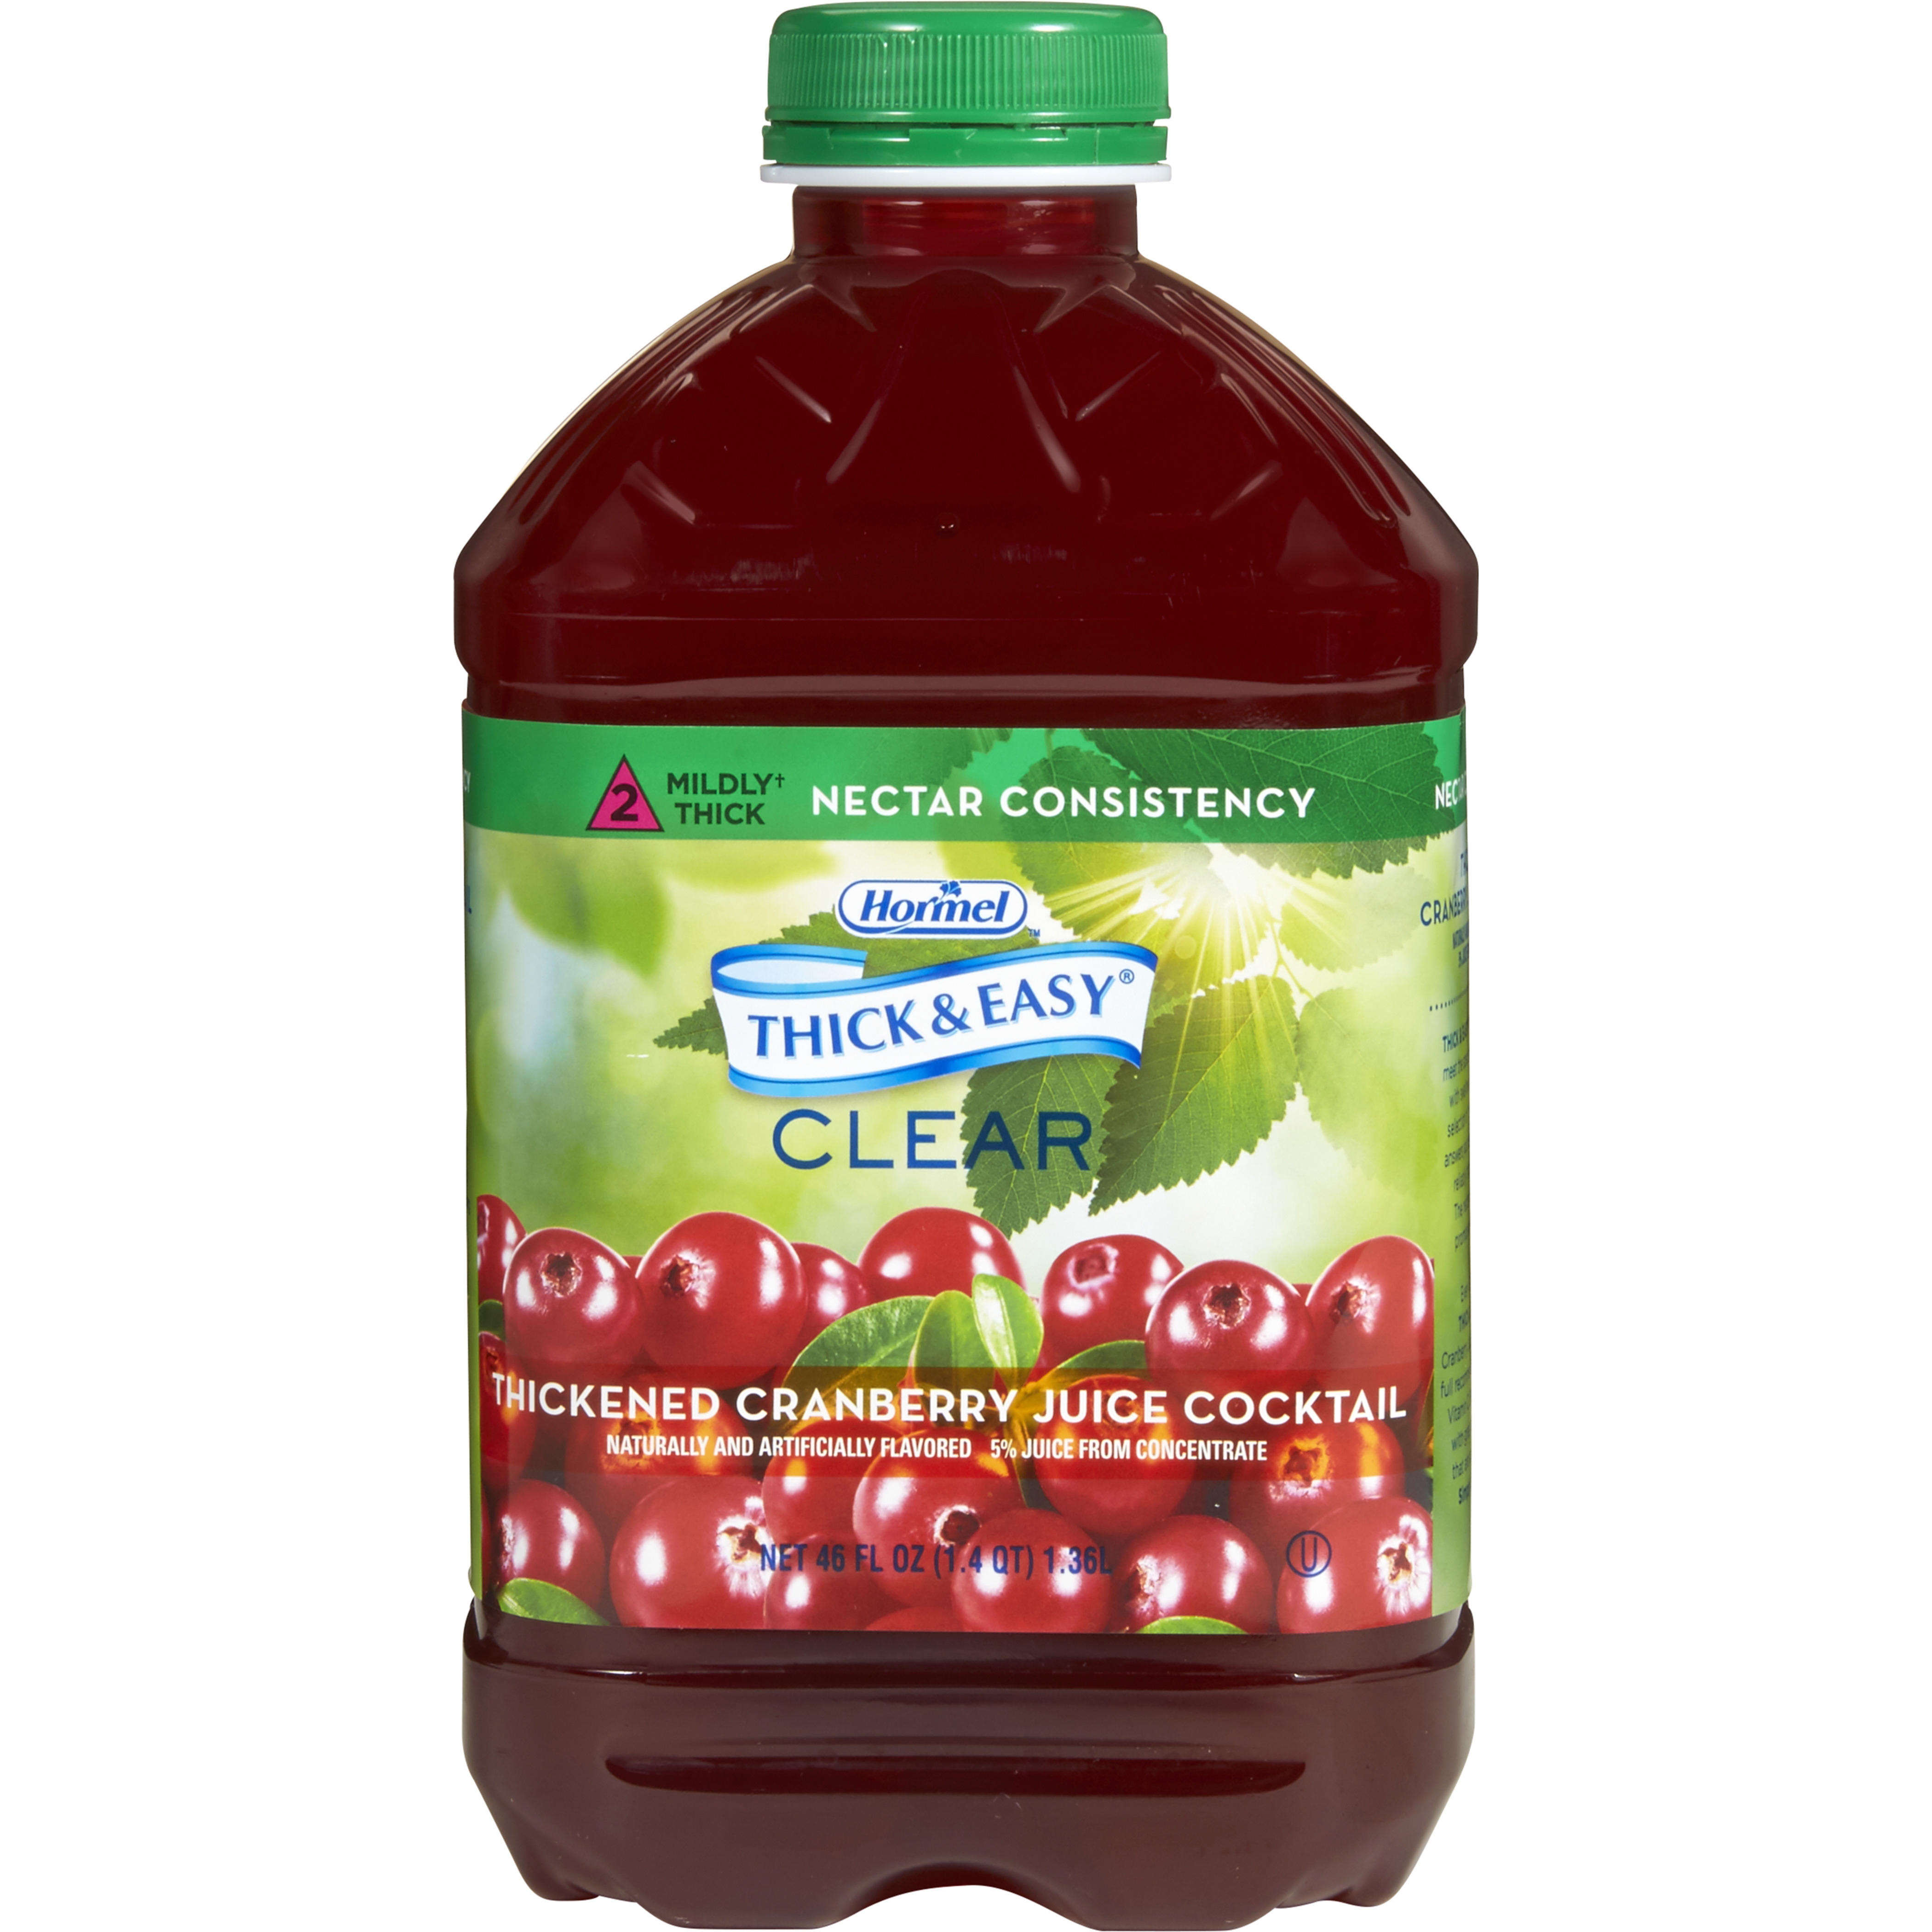 Thick & Easy Clear Nectar Consistency Cranberry Thickened Beverage, 46 oz. Bottle